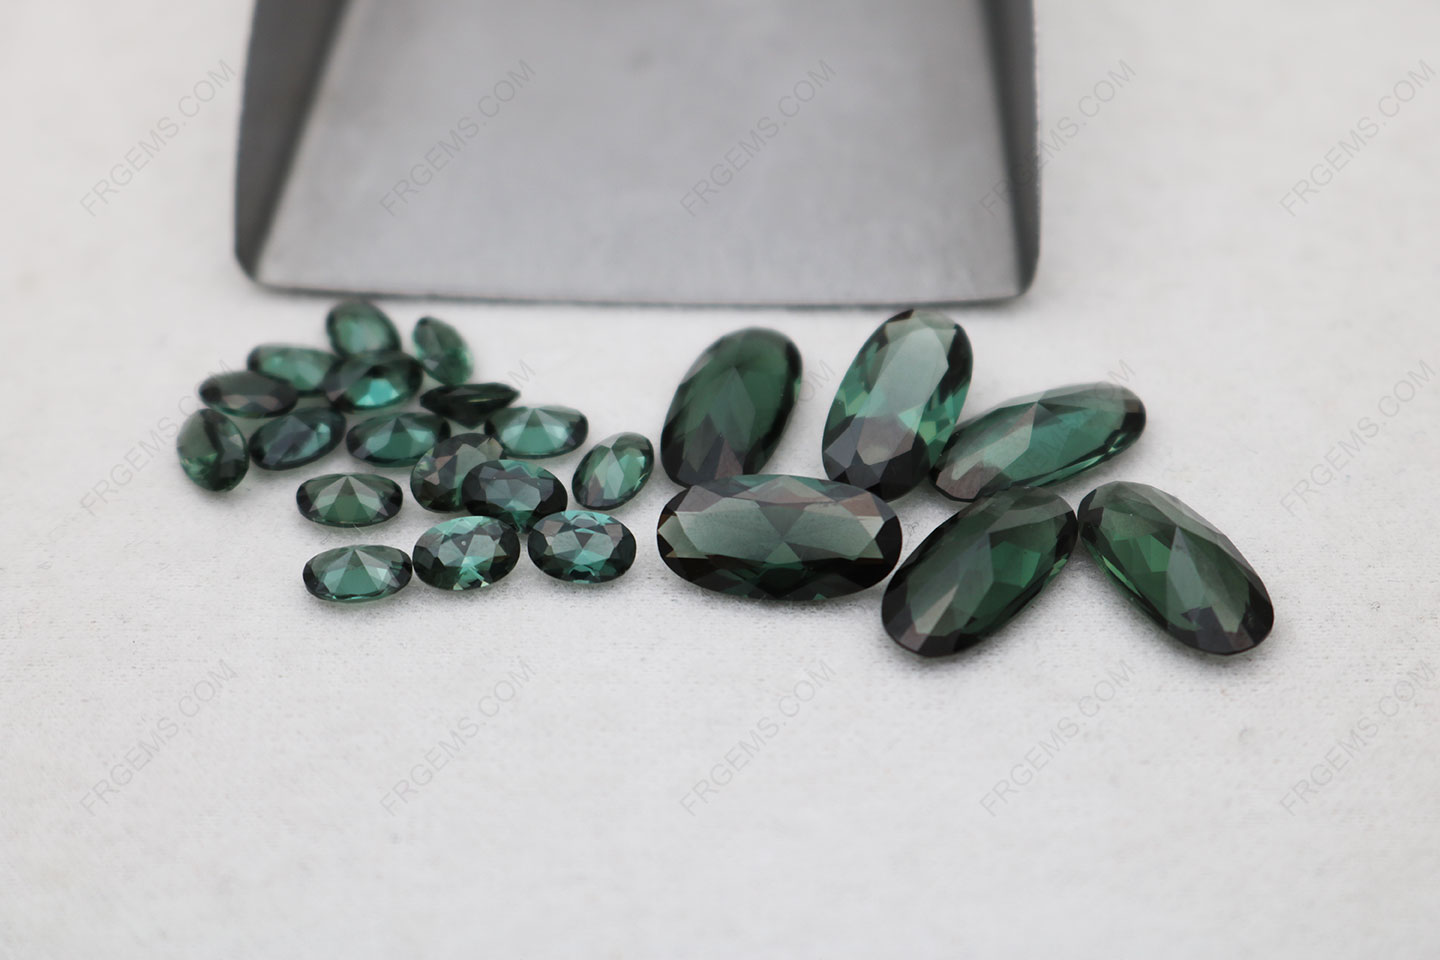 Synthetic Green Tourmaline Color Spinel #152 Oval Shape Faceted Cut 6x4mm and 14x7mm gemstones